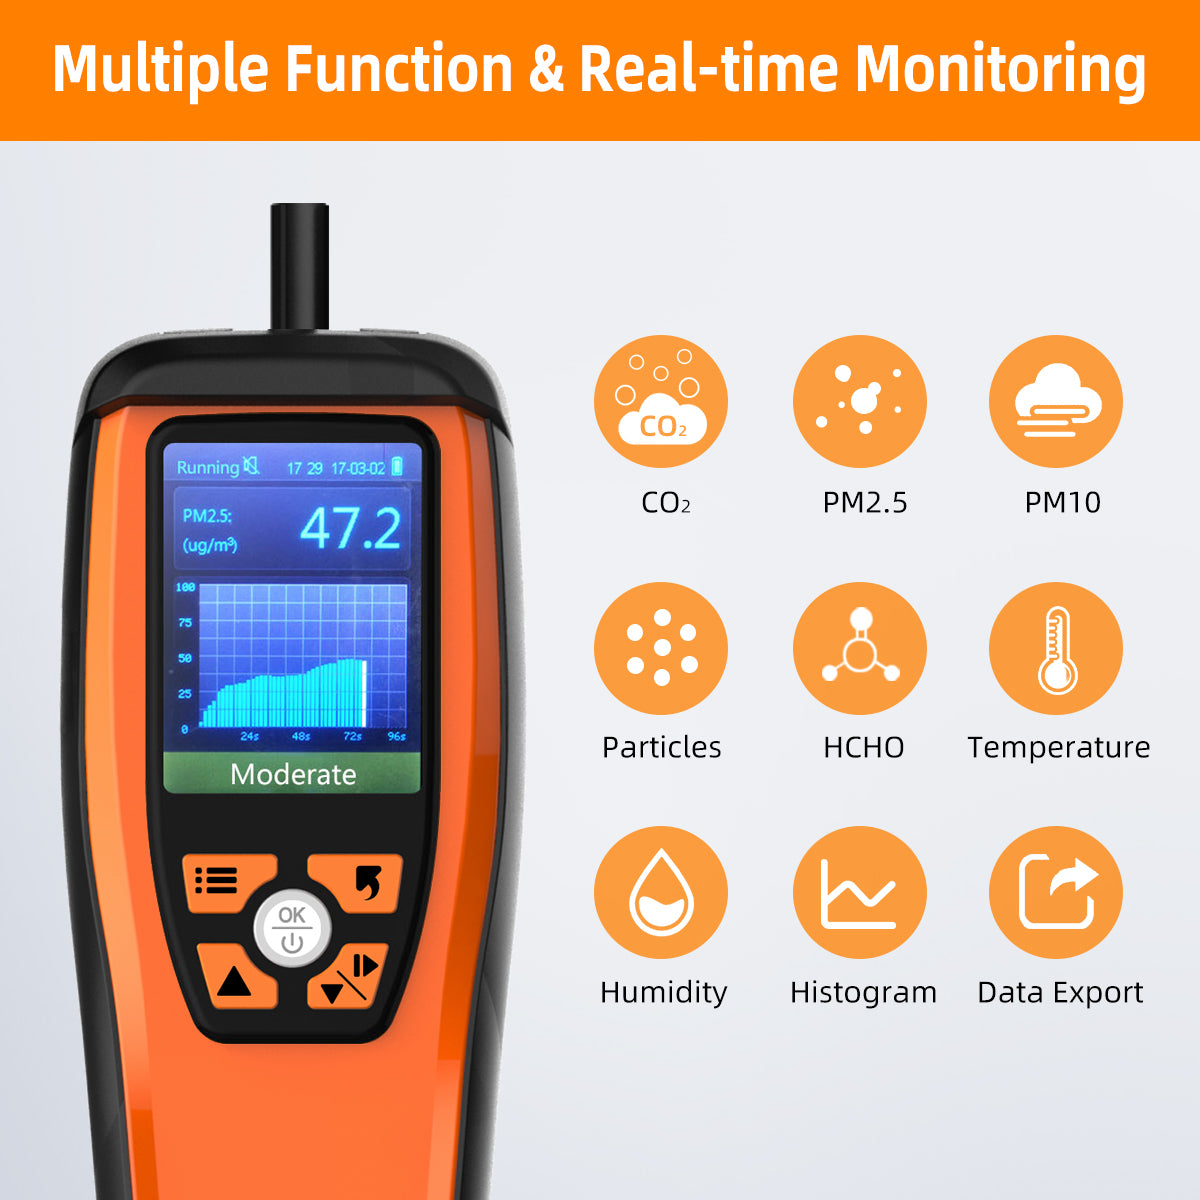 Temtop M2000 2nd Generation Air Quality Monitor User Manual